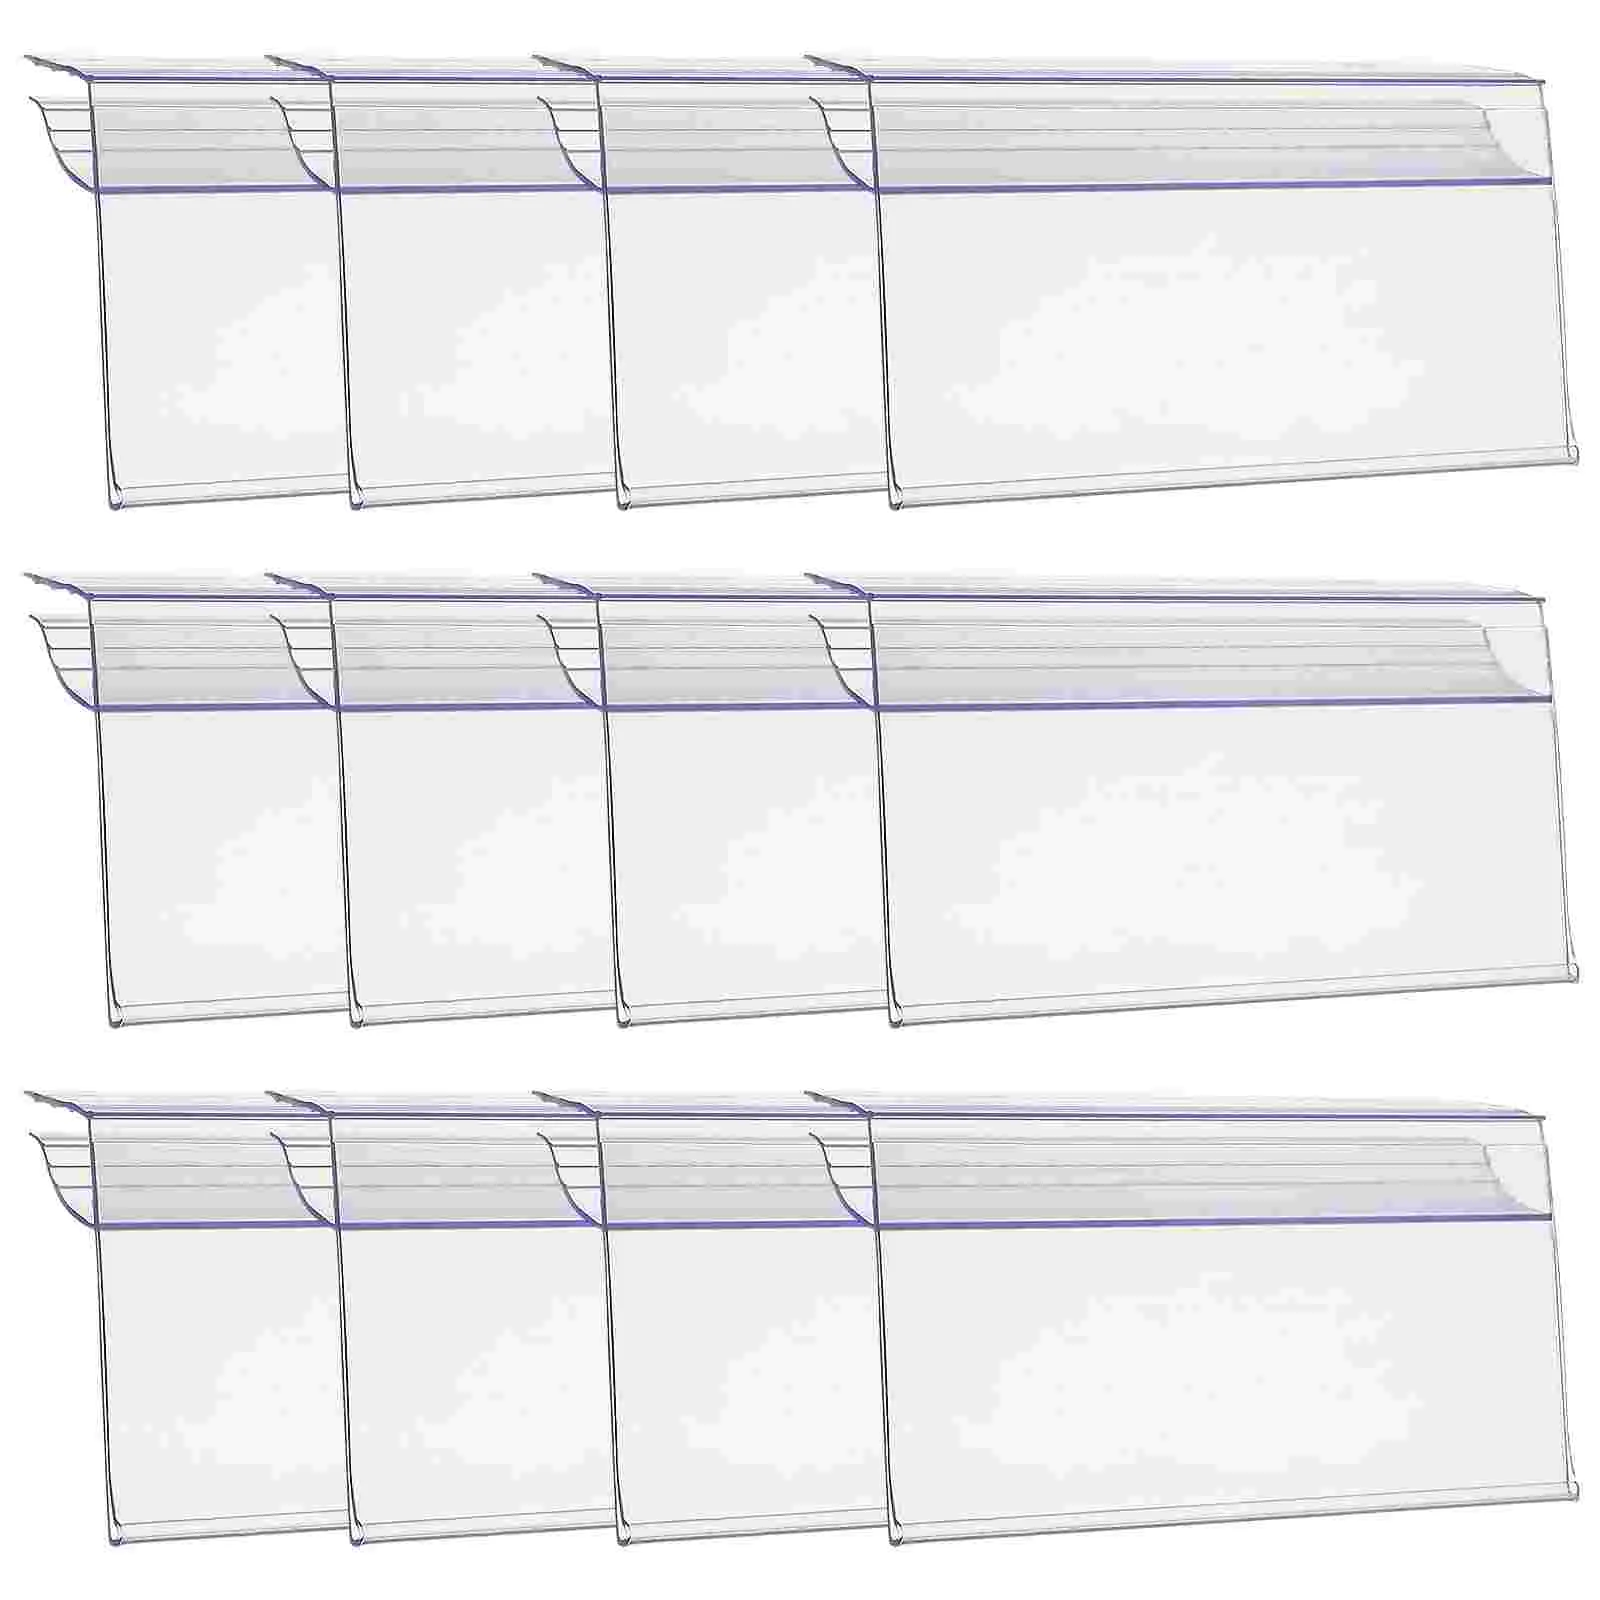 

30 Pcs Price Tag Display Holder Plastic Shelves Supermarket Mall Racking Merchandise Retail Commodity Label Holders Card Glass